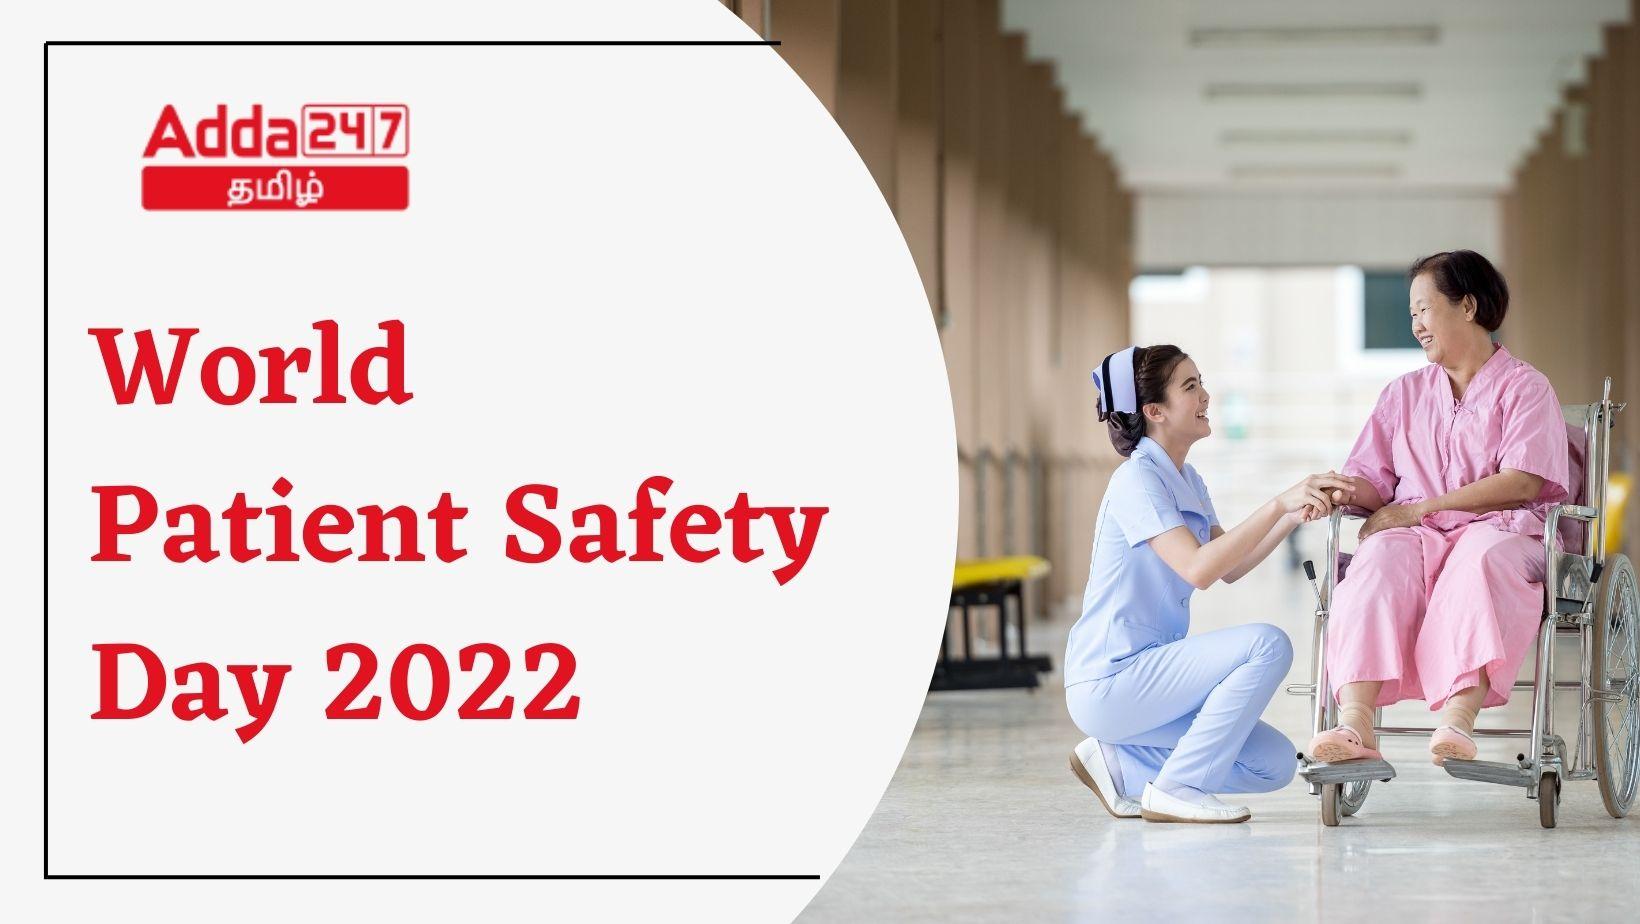 World Patient Safety Day 2022, History, Significance and Theme | உலக நோயாளிகள் பாதுகாப்பு தினம் 2022_30.1